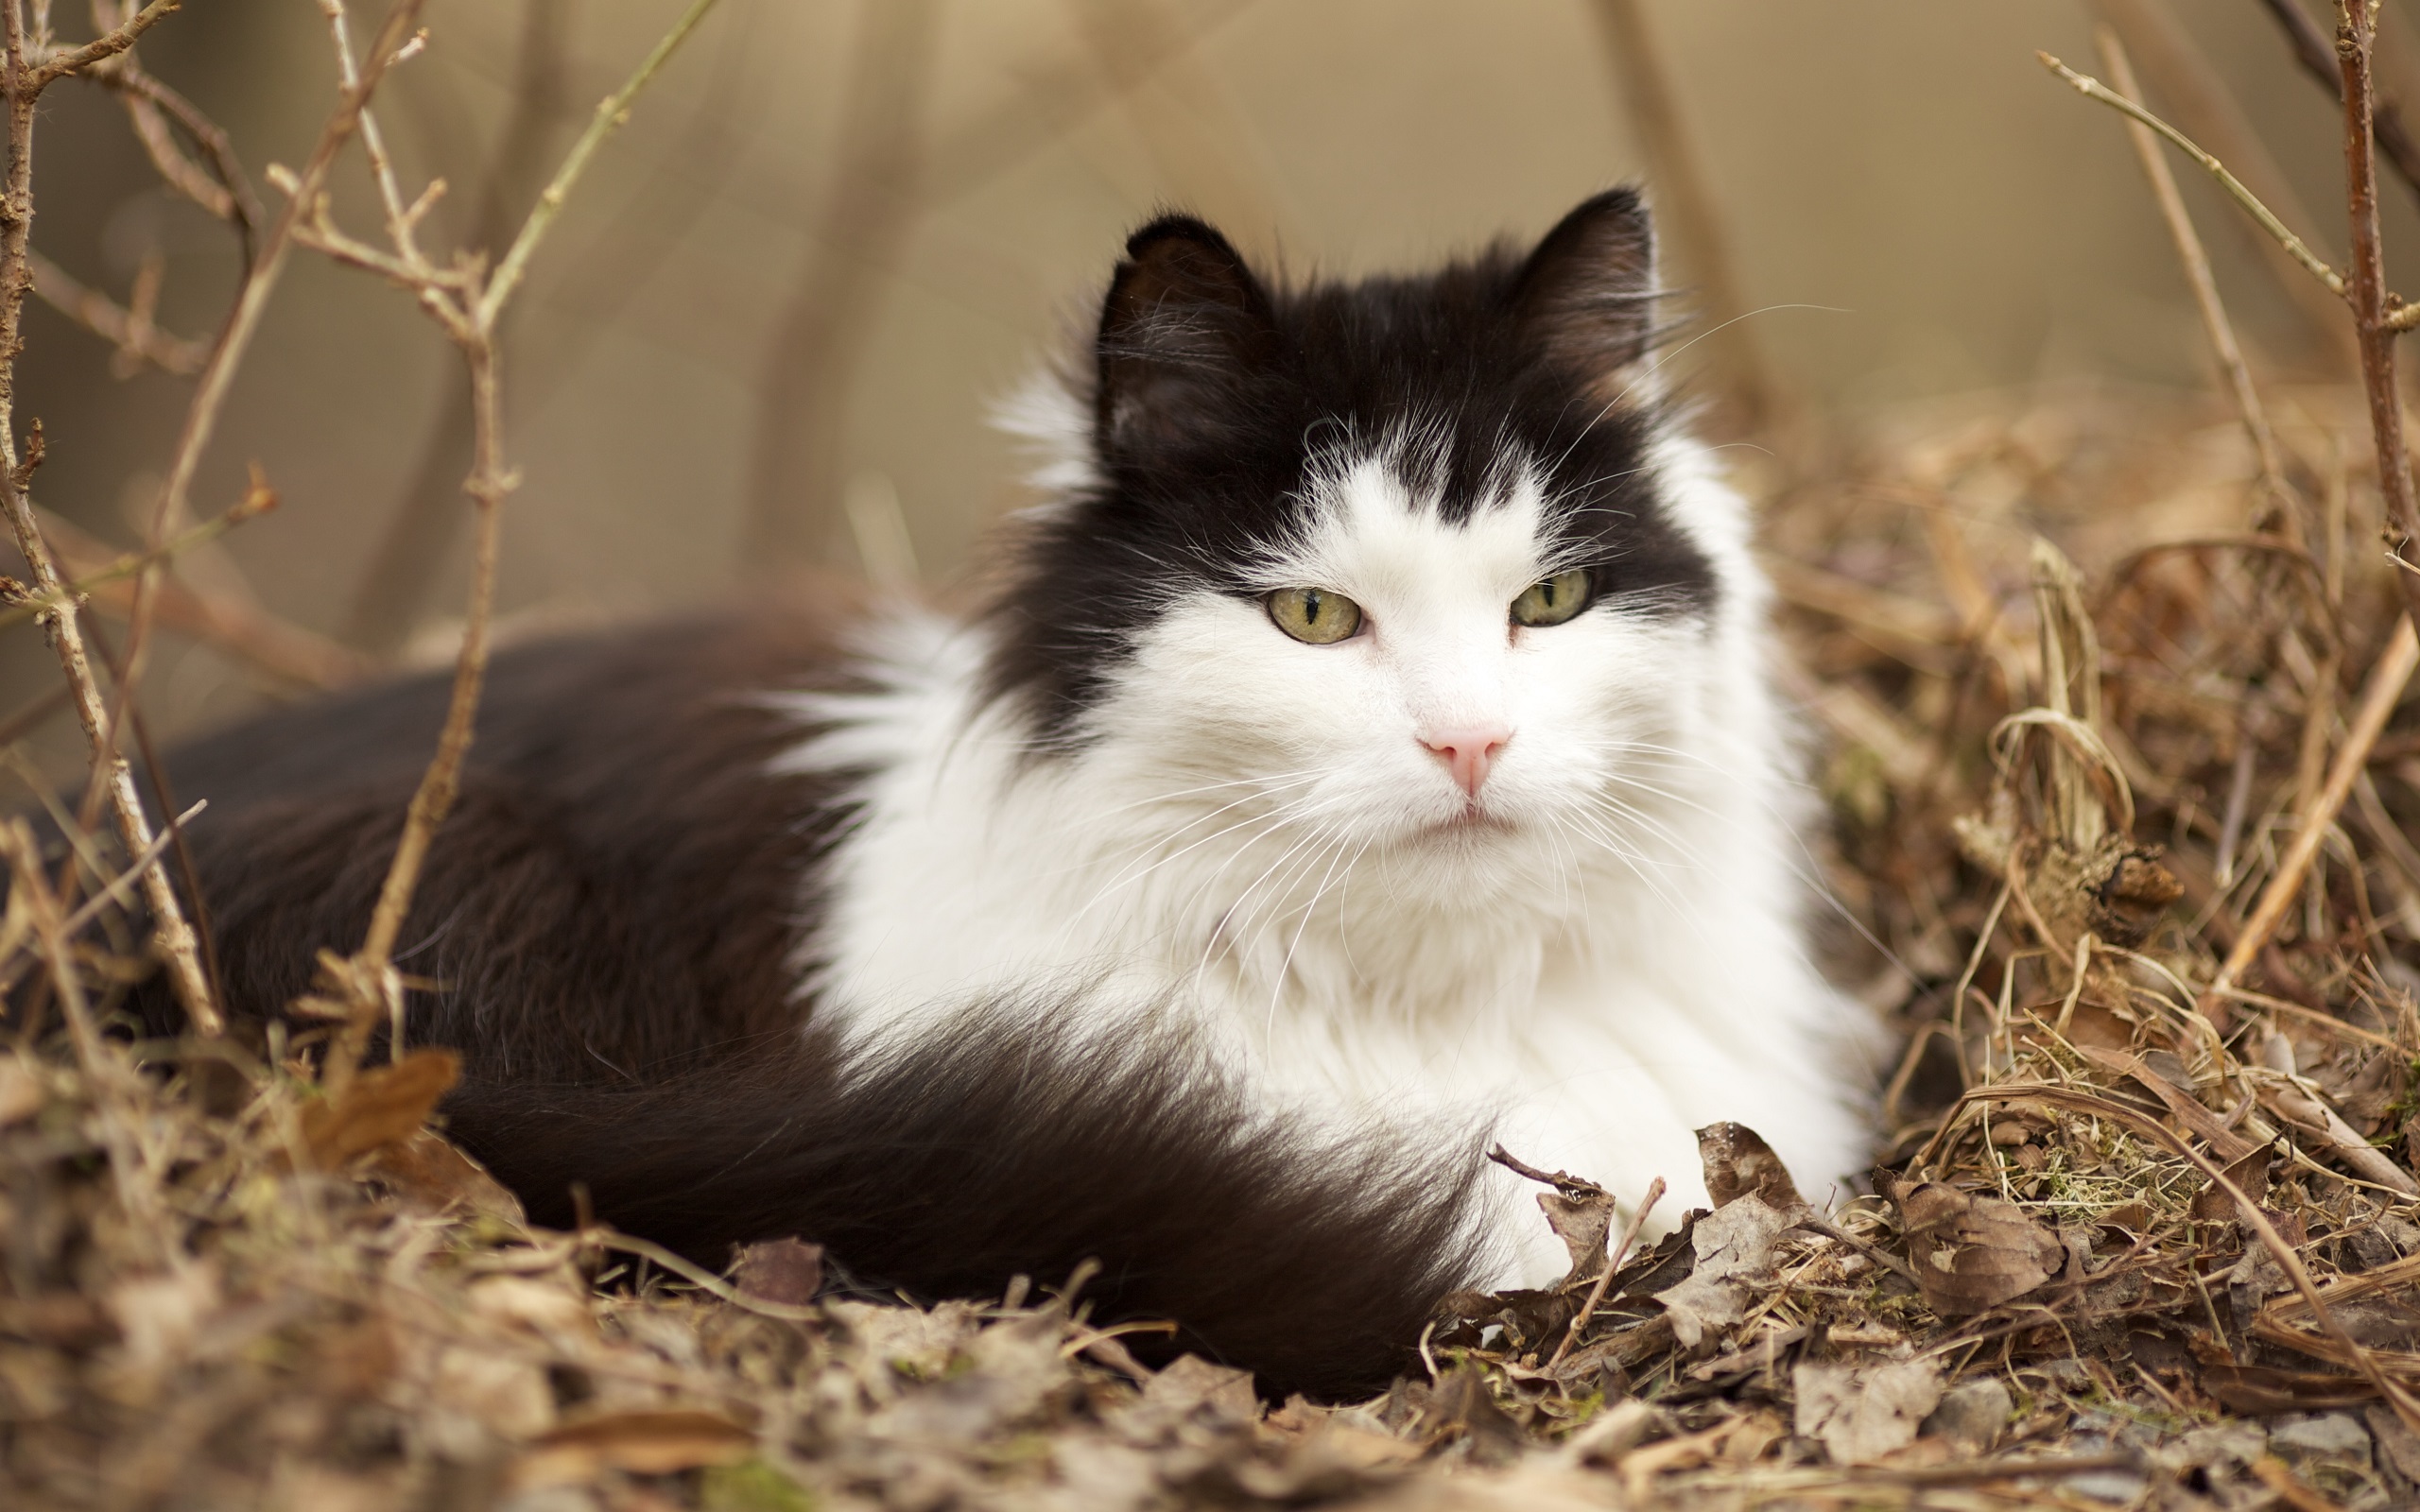 General 2560x1600 cats animals nature depth of field closeup outdoors on the ground